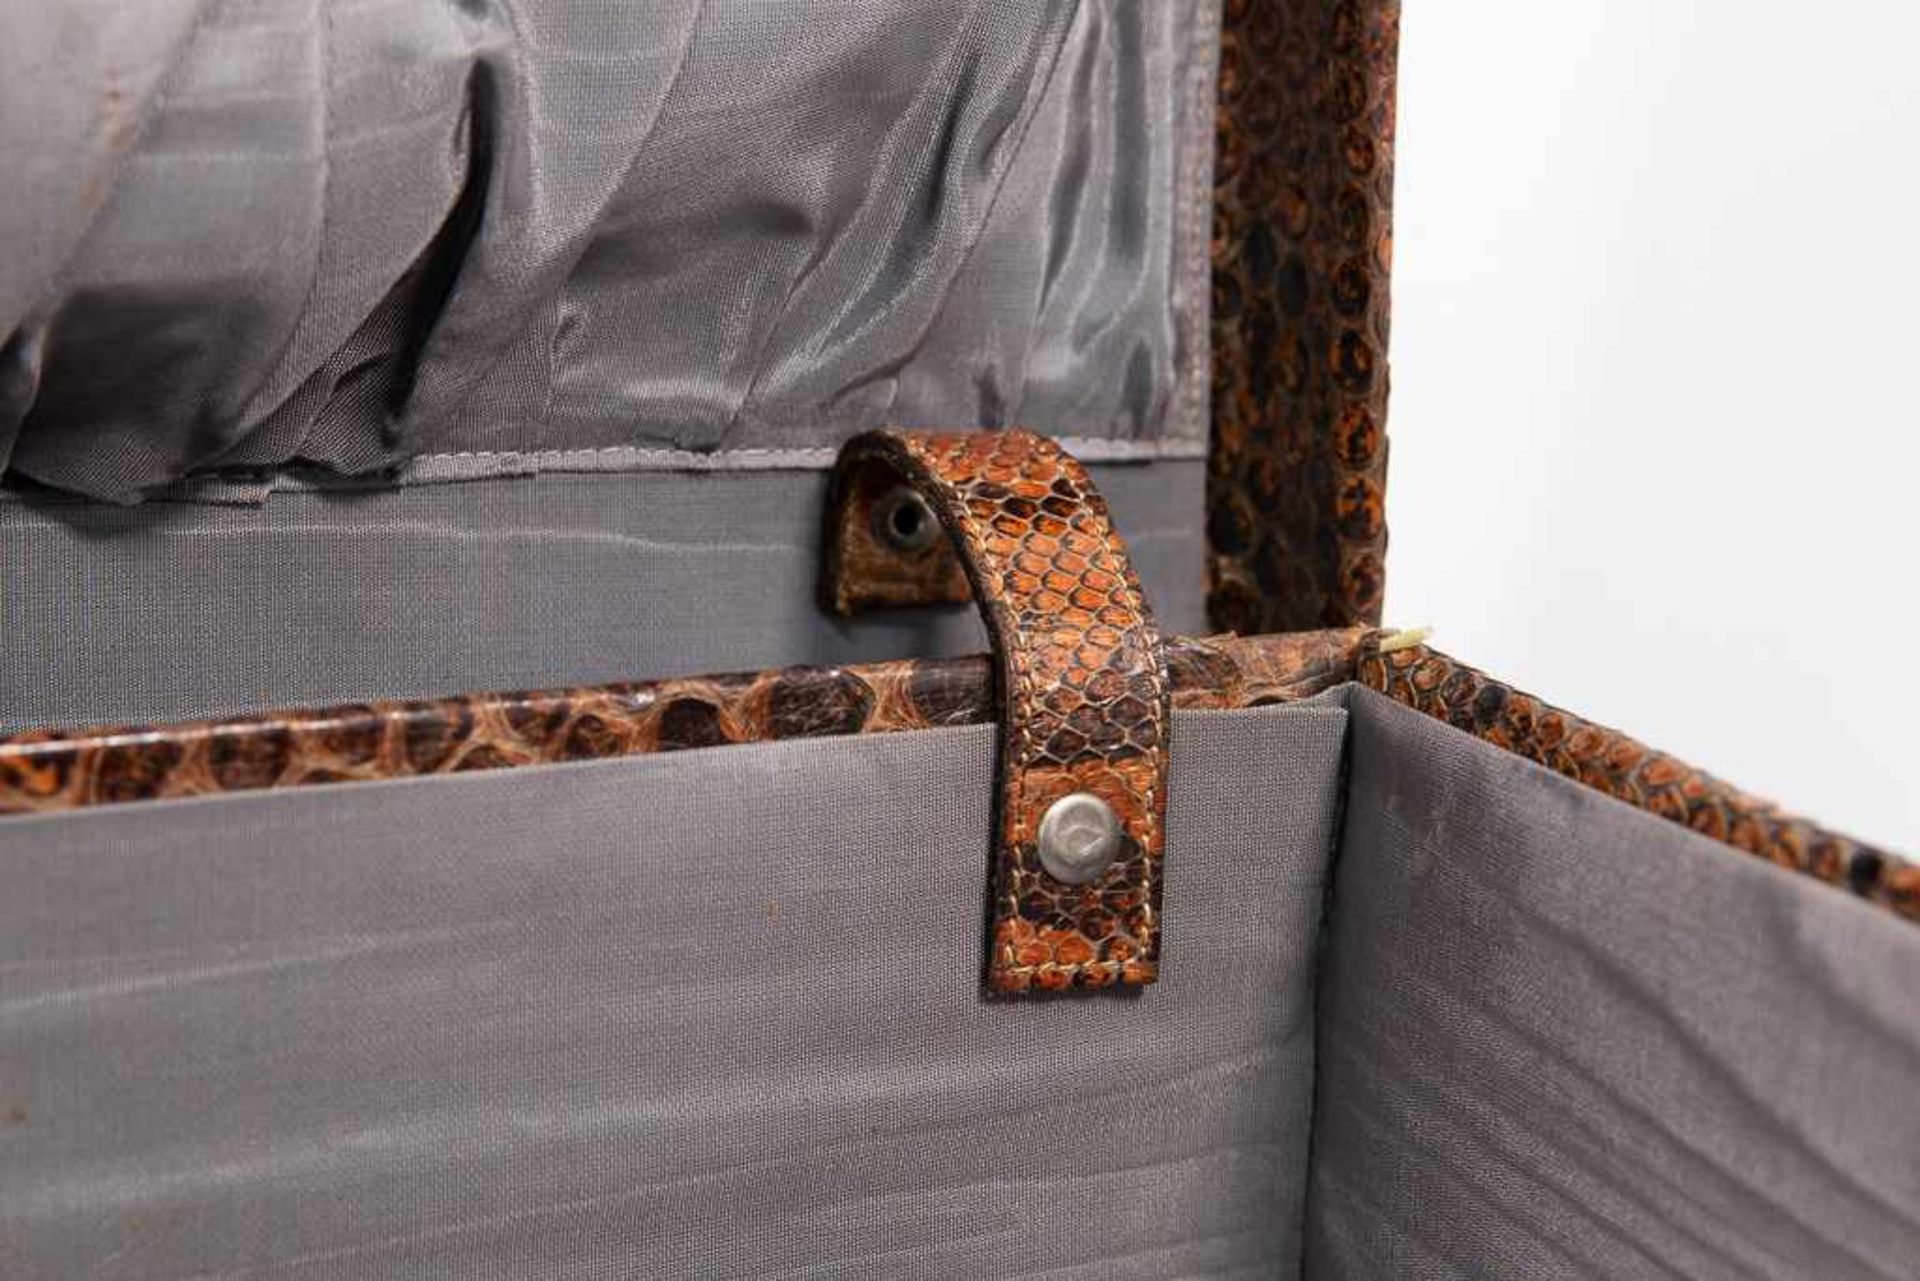 Suitcase in snake leather - Image 14 of 15